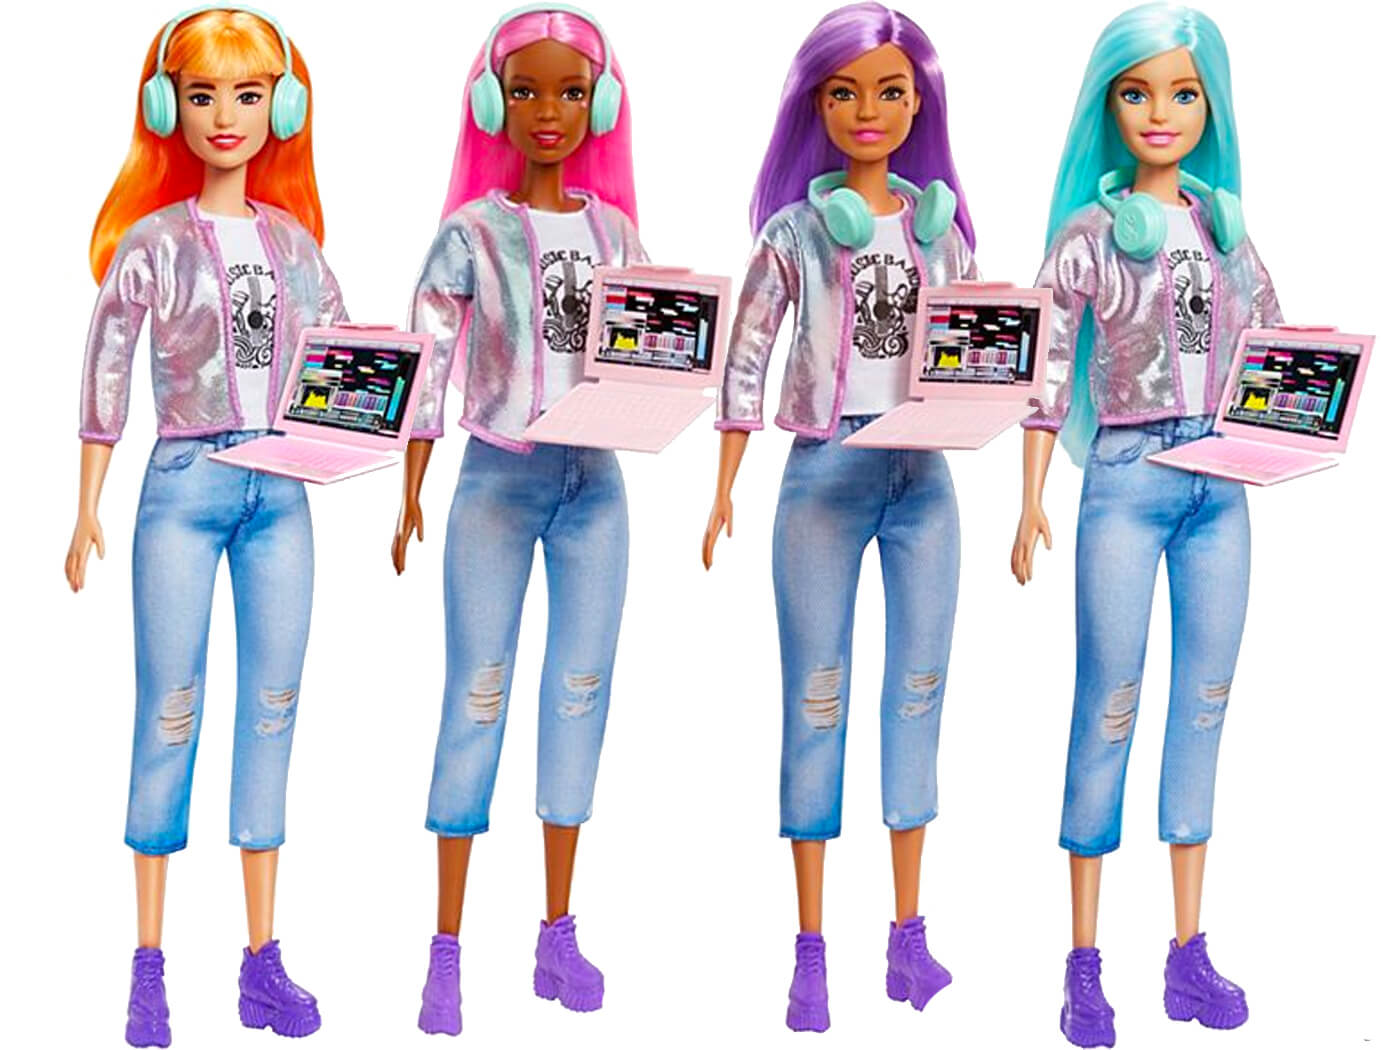 Four music producer Barbie dolls with colorful hair